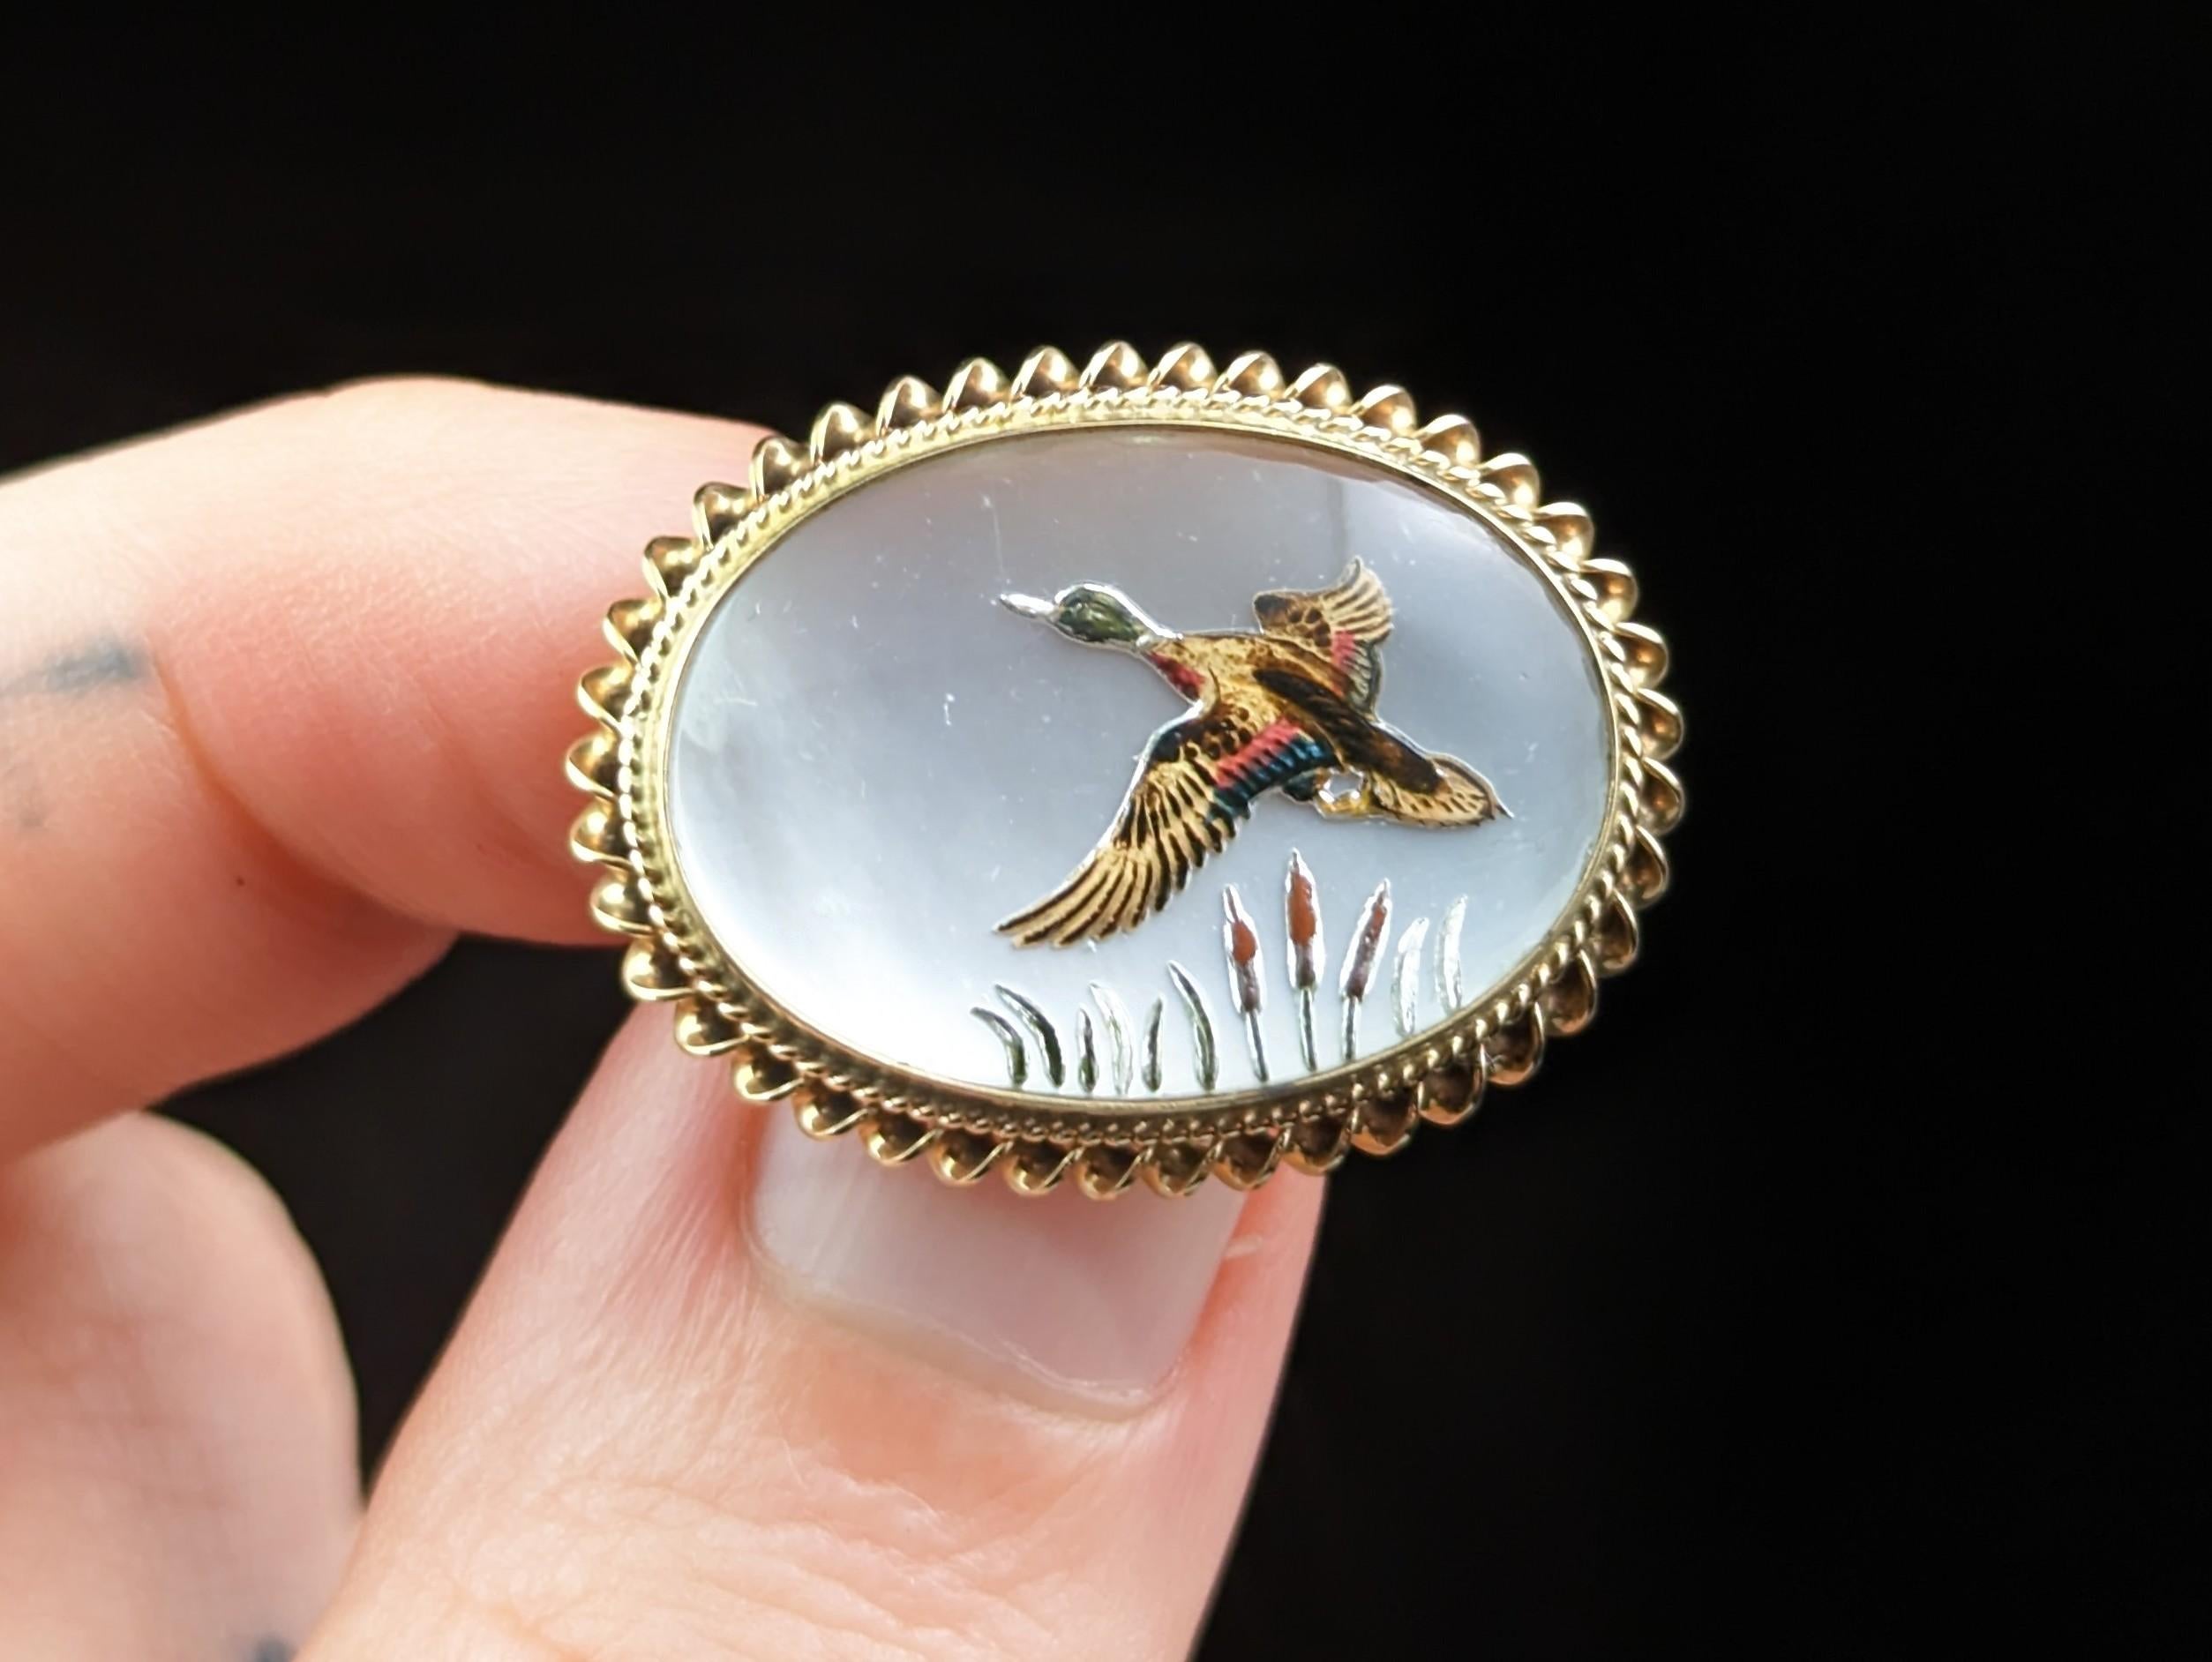 Always a hit are animal themed jewels like this fine vintage 9ct gold and Essex crystal flying duck brooch.

Animals have been used in jewellery for centuries with various meaning and symbolism, along with pet portraits and more.

This is a very